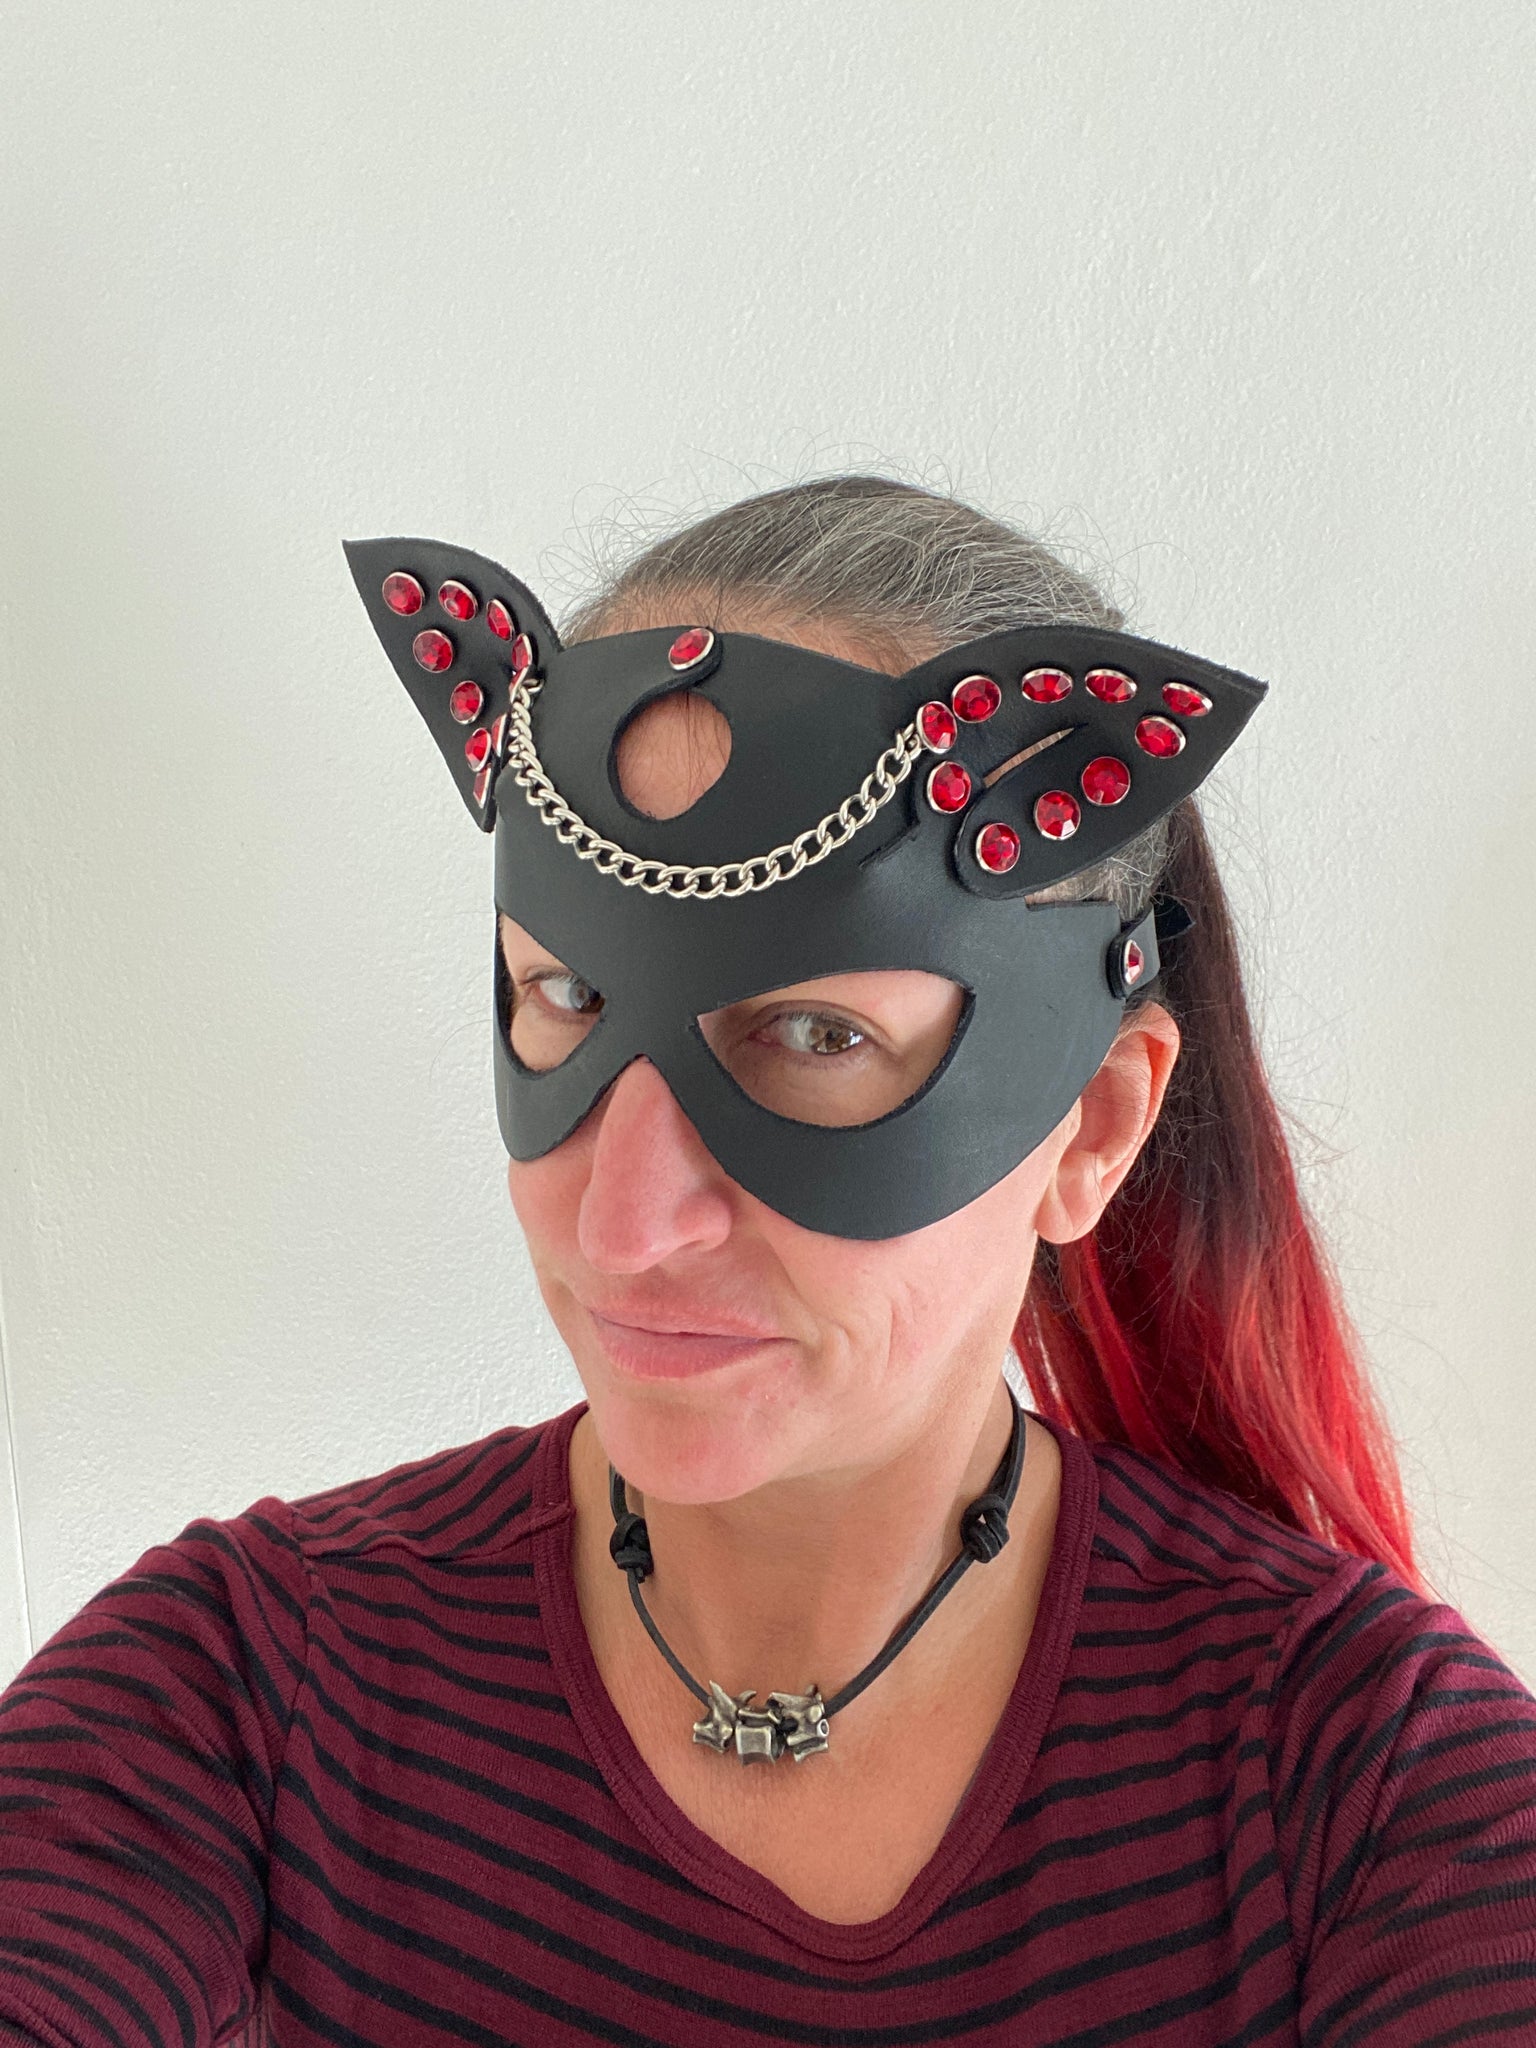 Lethal Kitty Mask - One Size